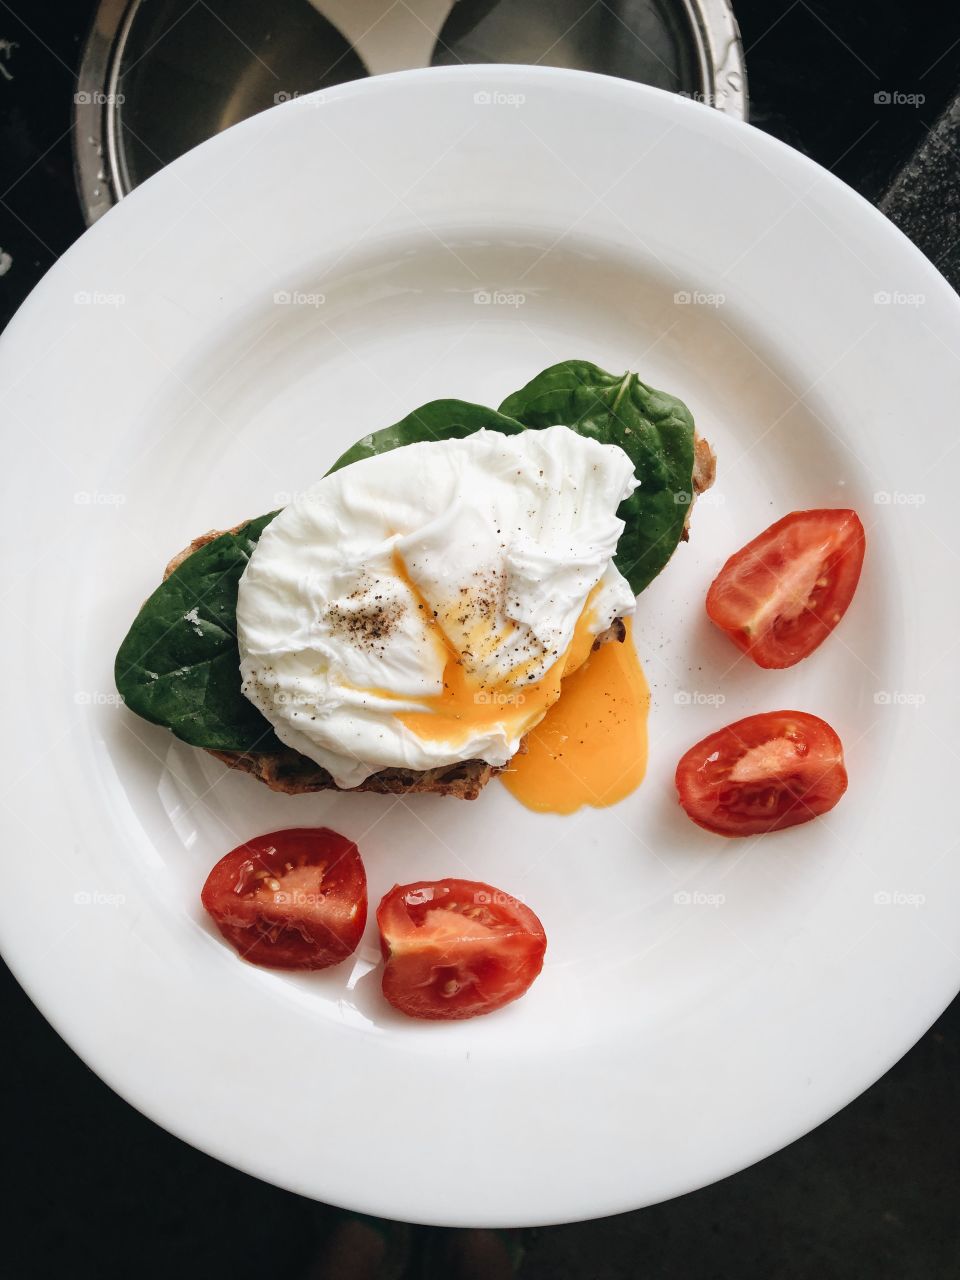 Poached egg on the plate